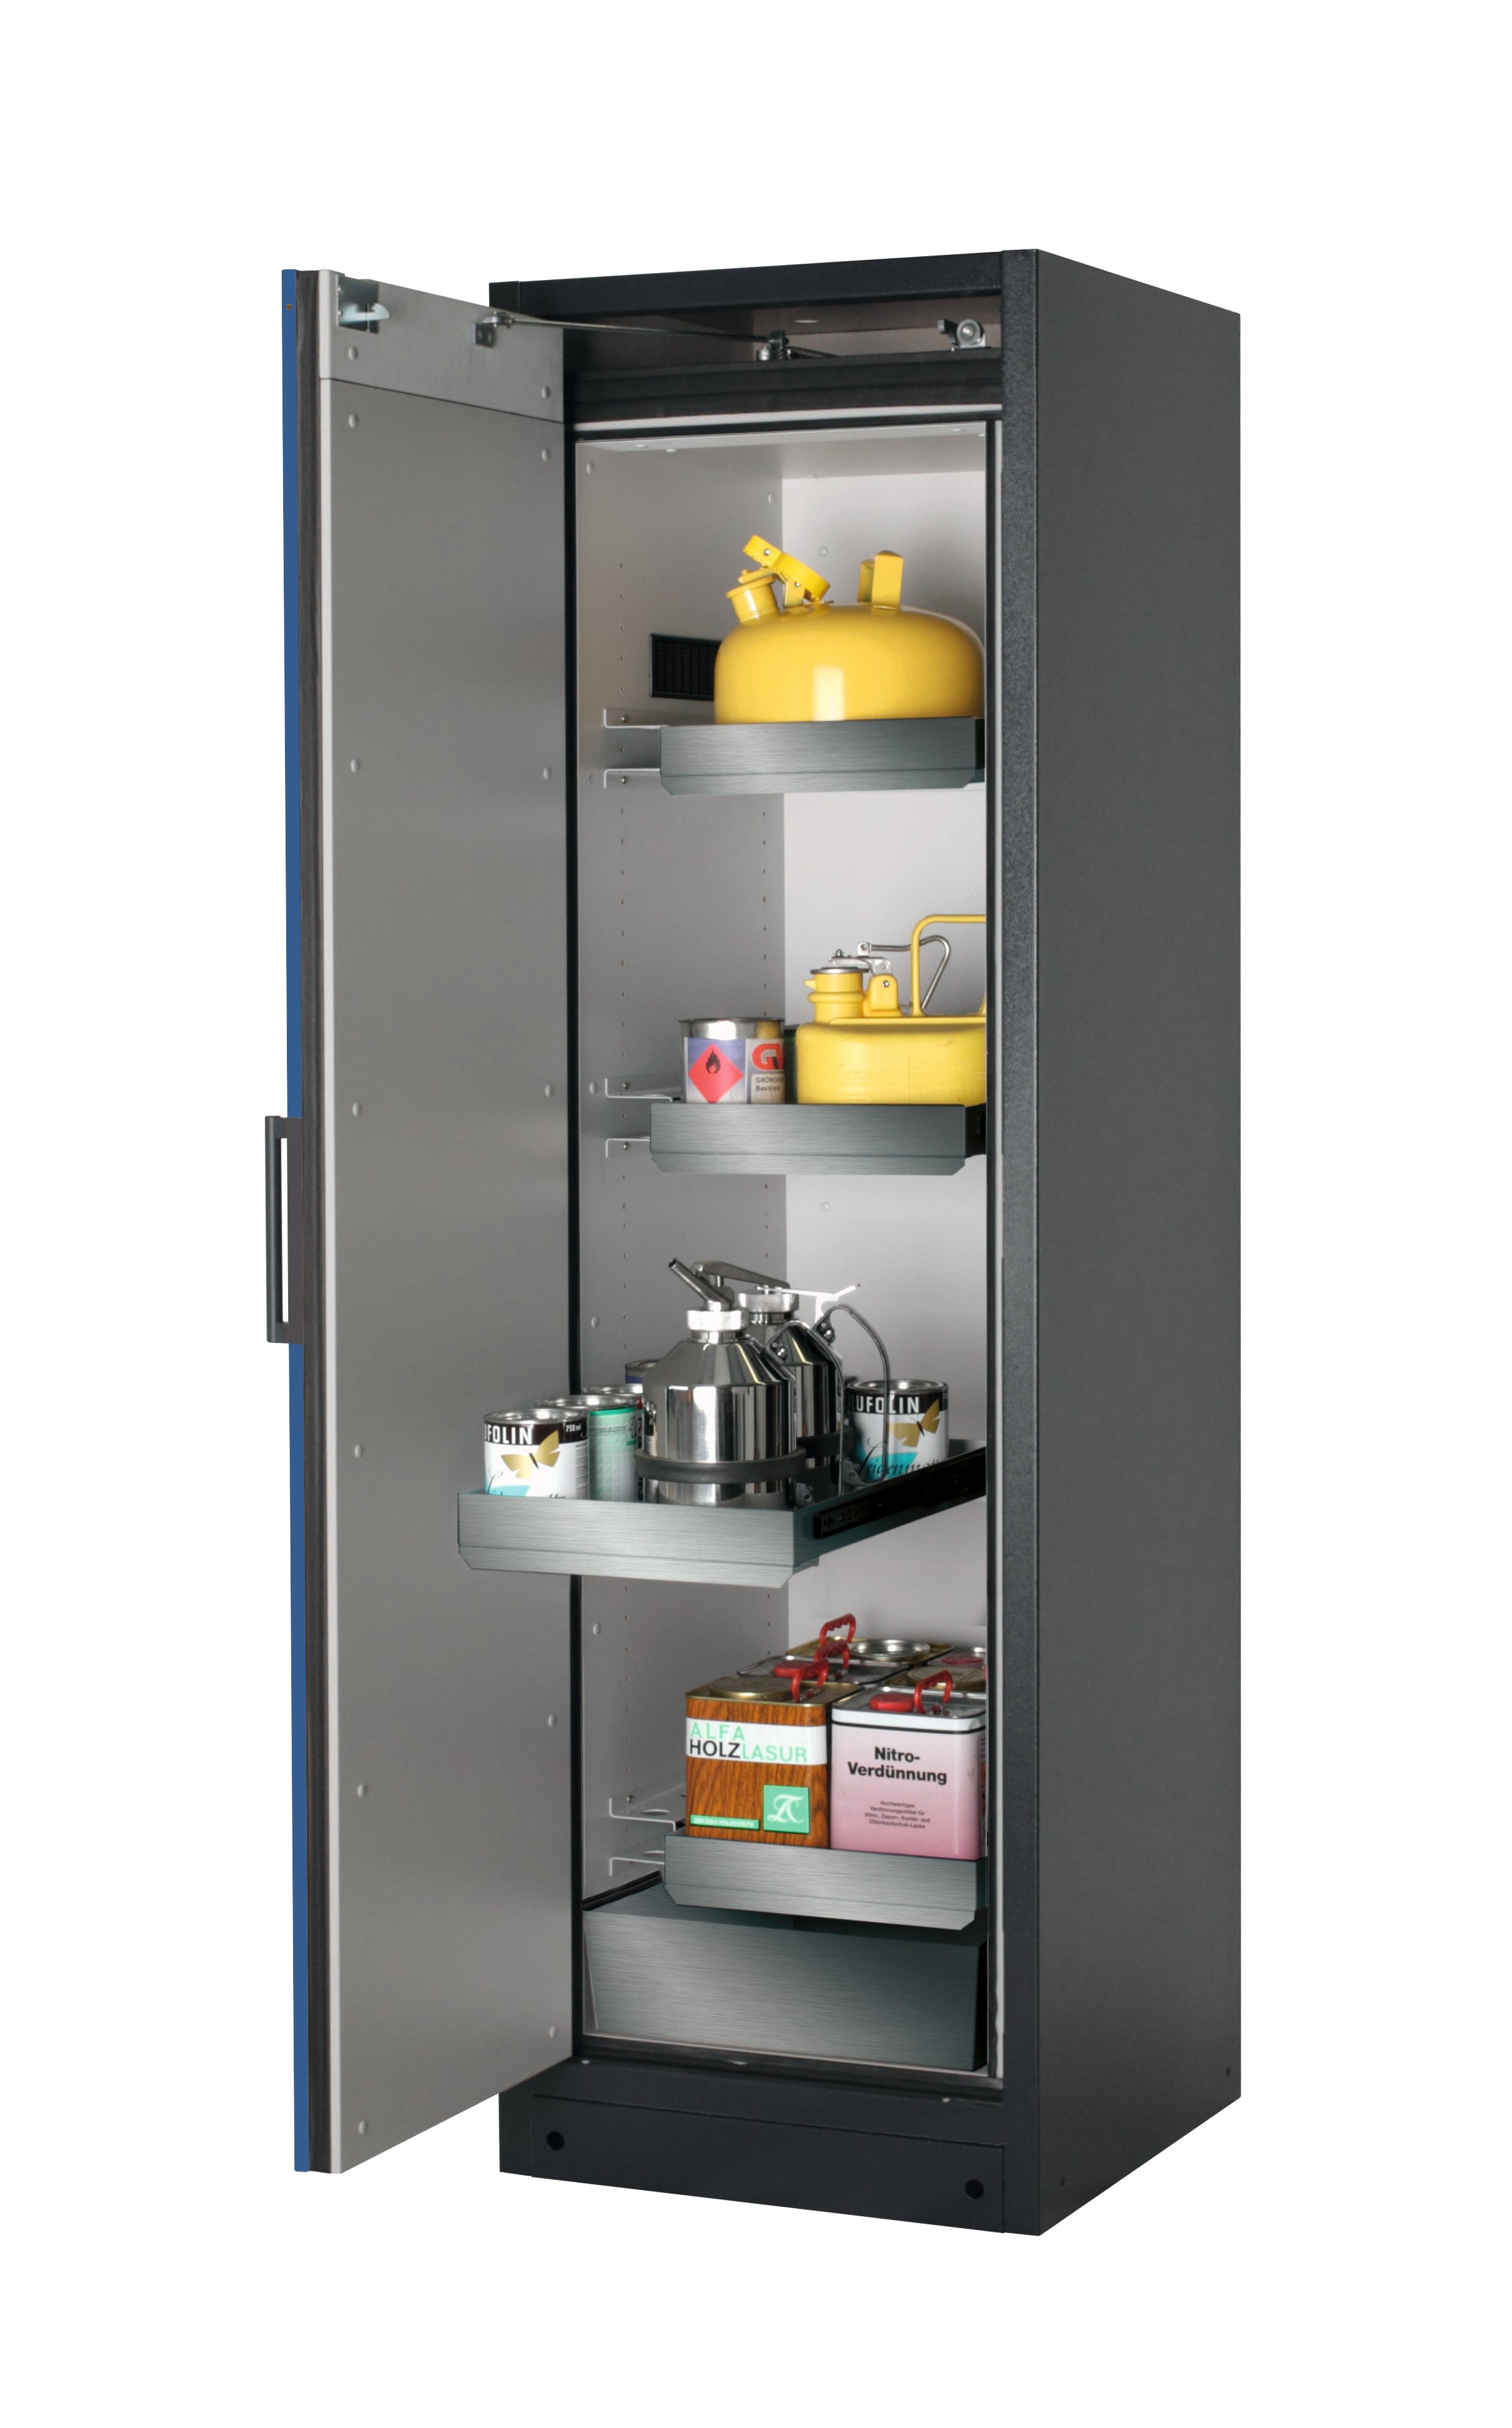 Type 90 safety storage cabinet Q-PEGASUS-90 model Q90.195.060.WDAC in gentian blue RAL 5010 with 3x drawer (standard) (stainless steel 1.4301),